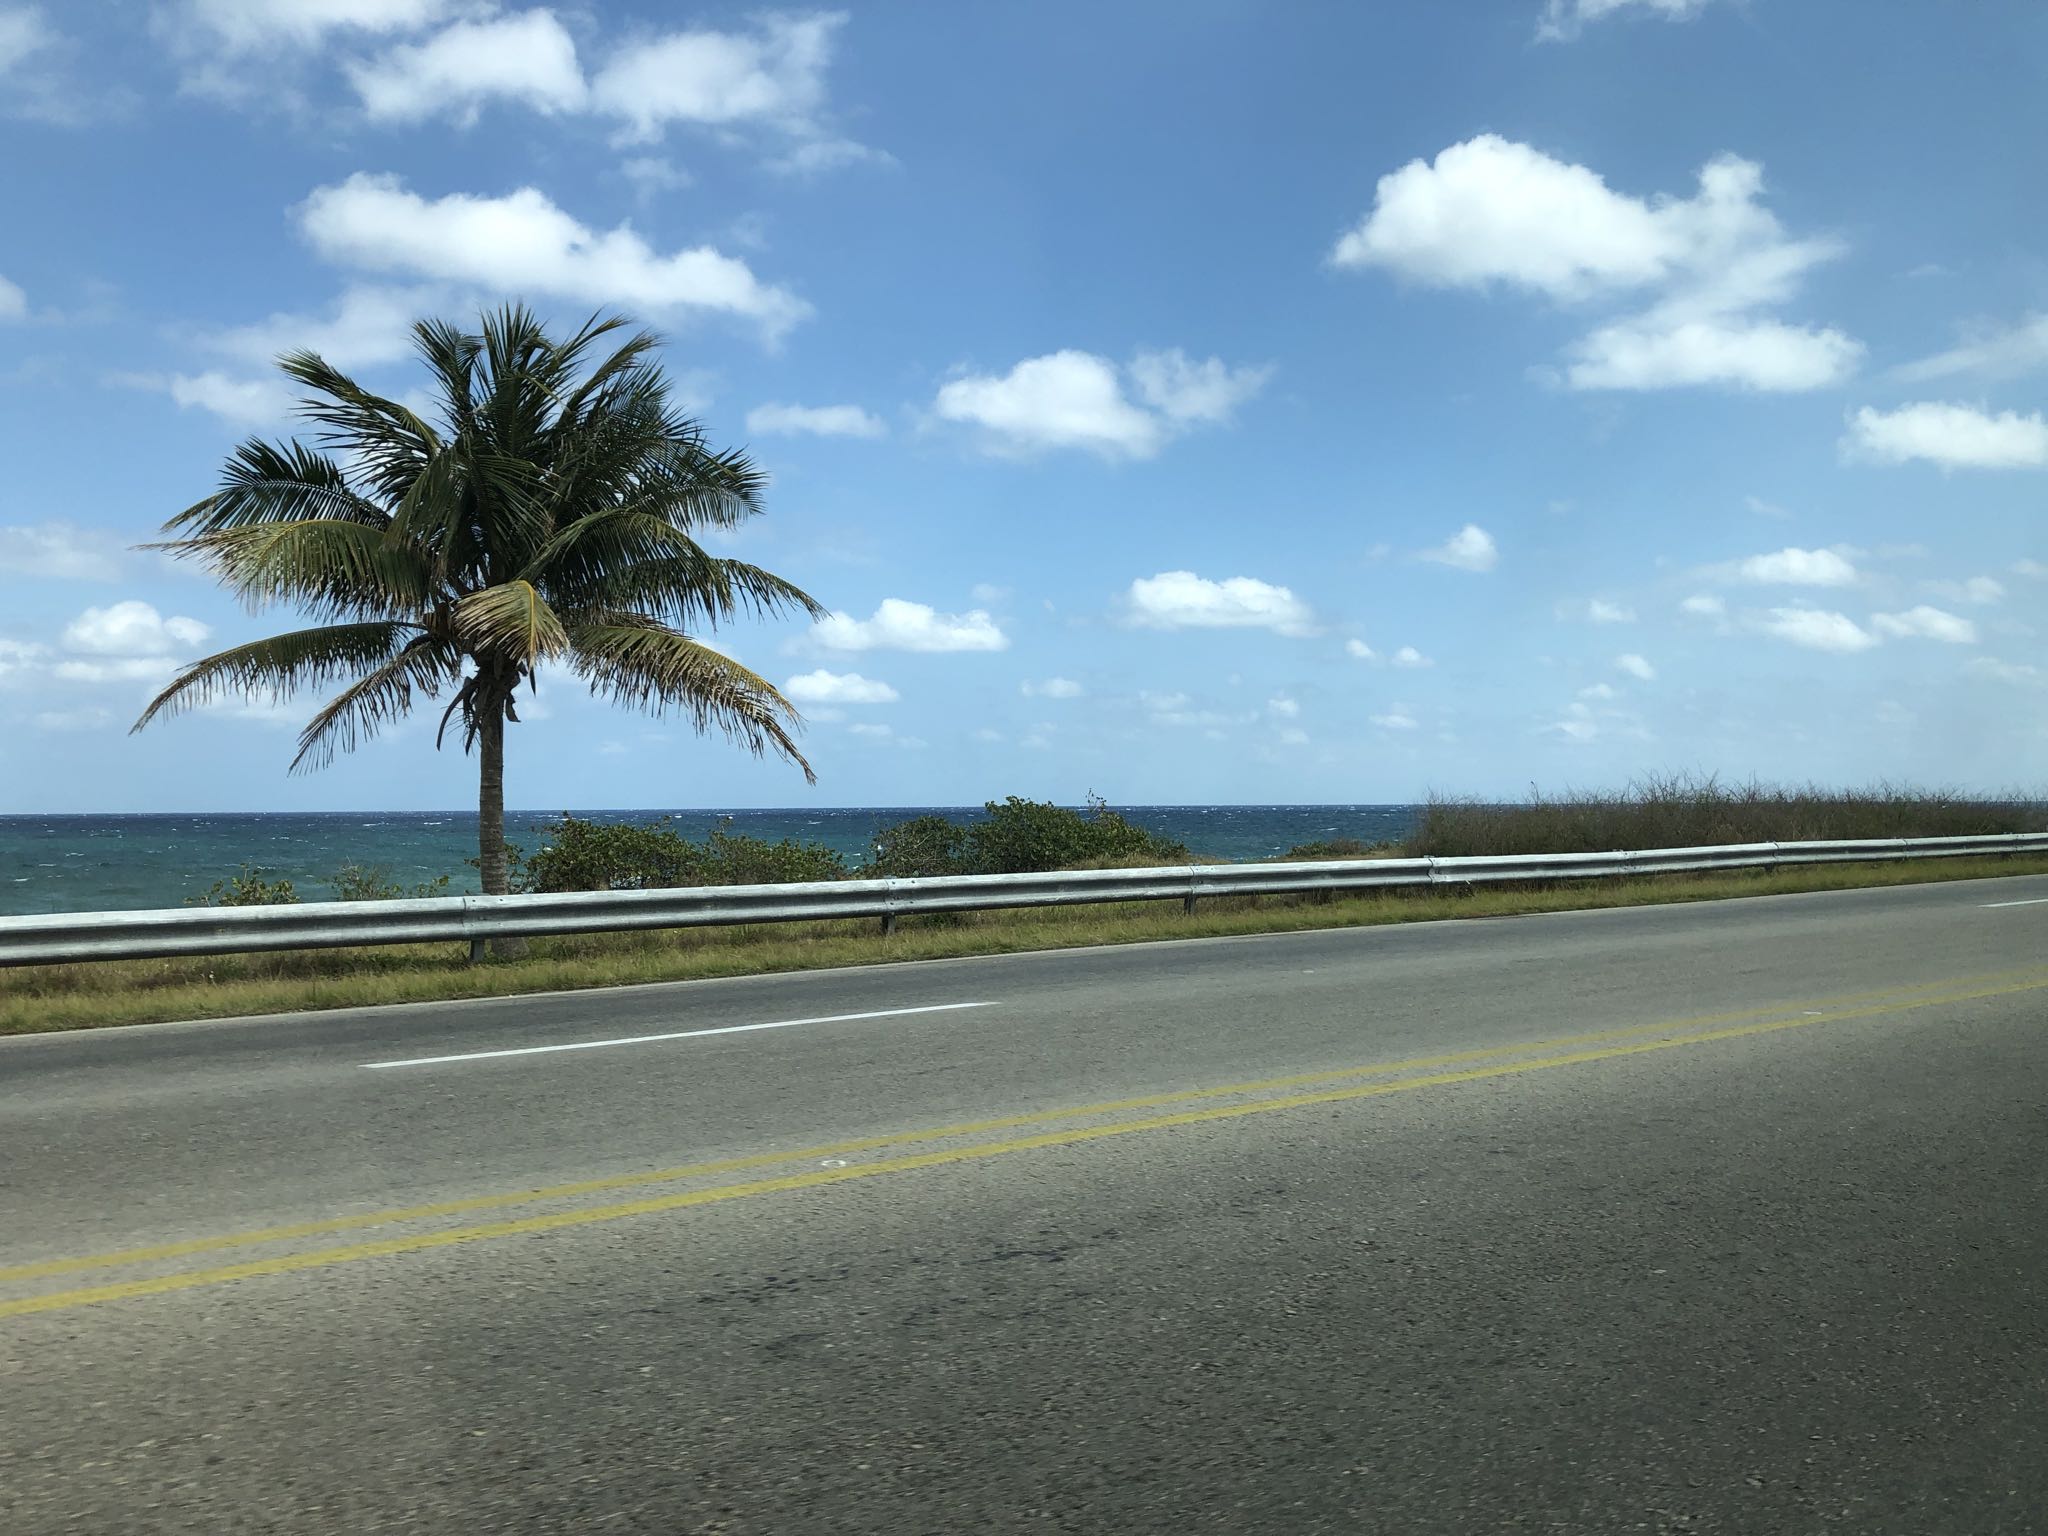 Photo 204 of 221 from the album Highlights Cuba 2019.